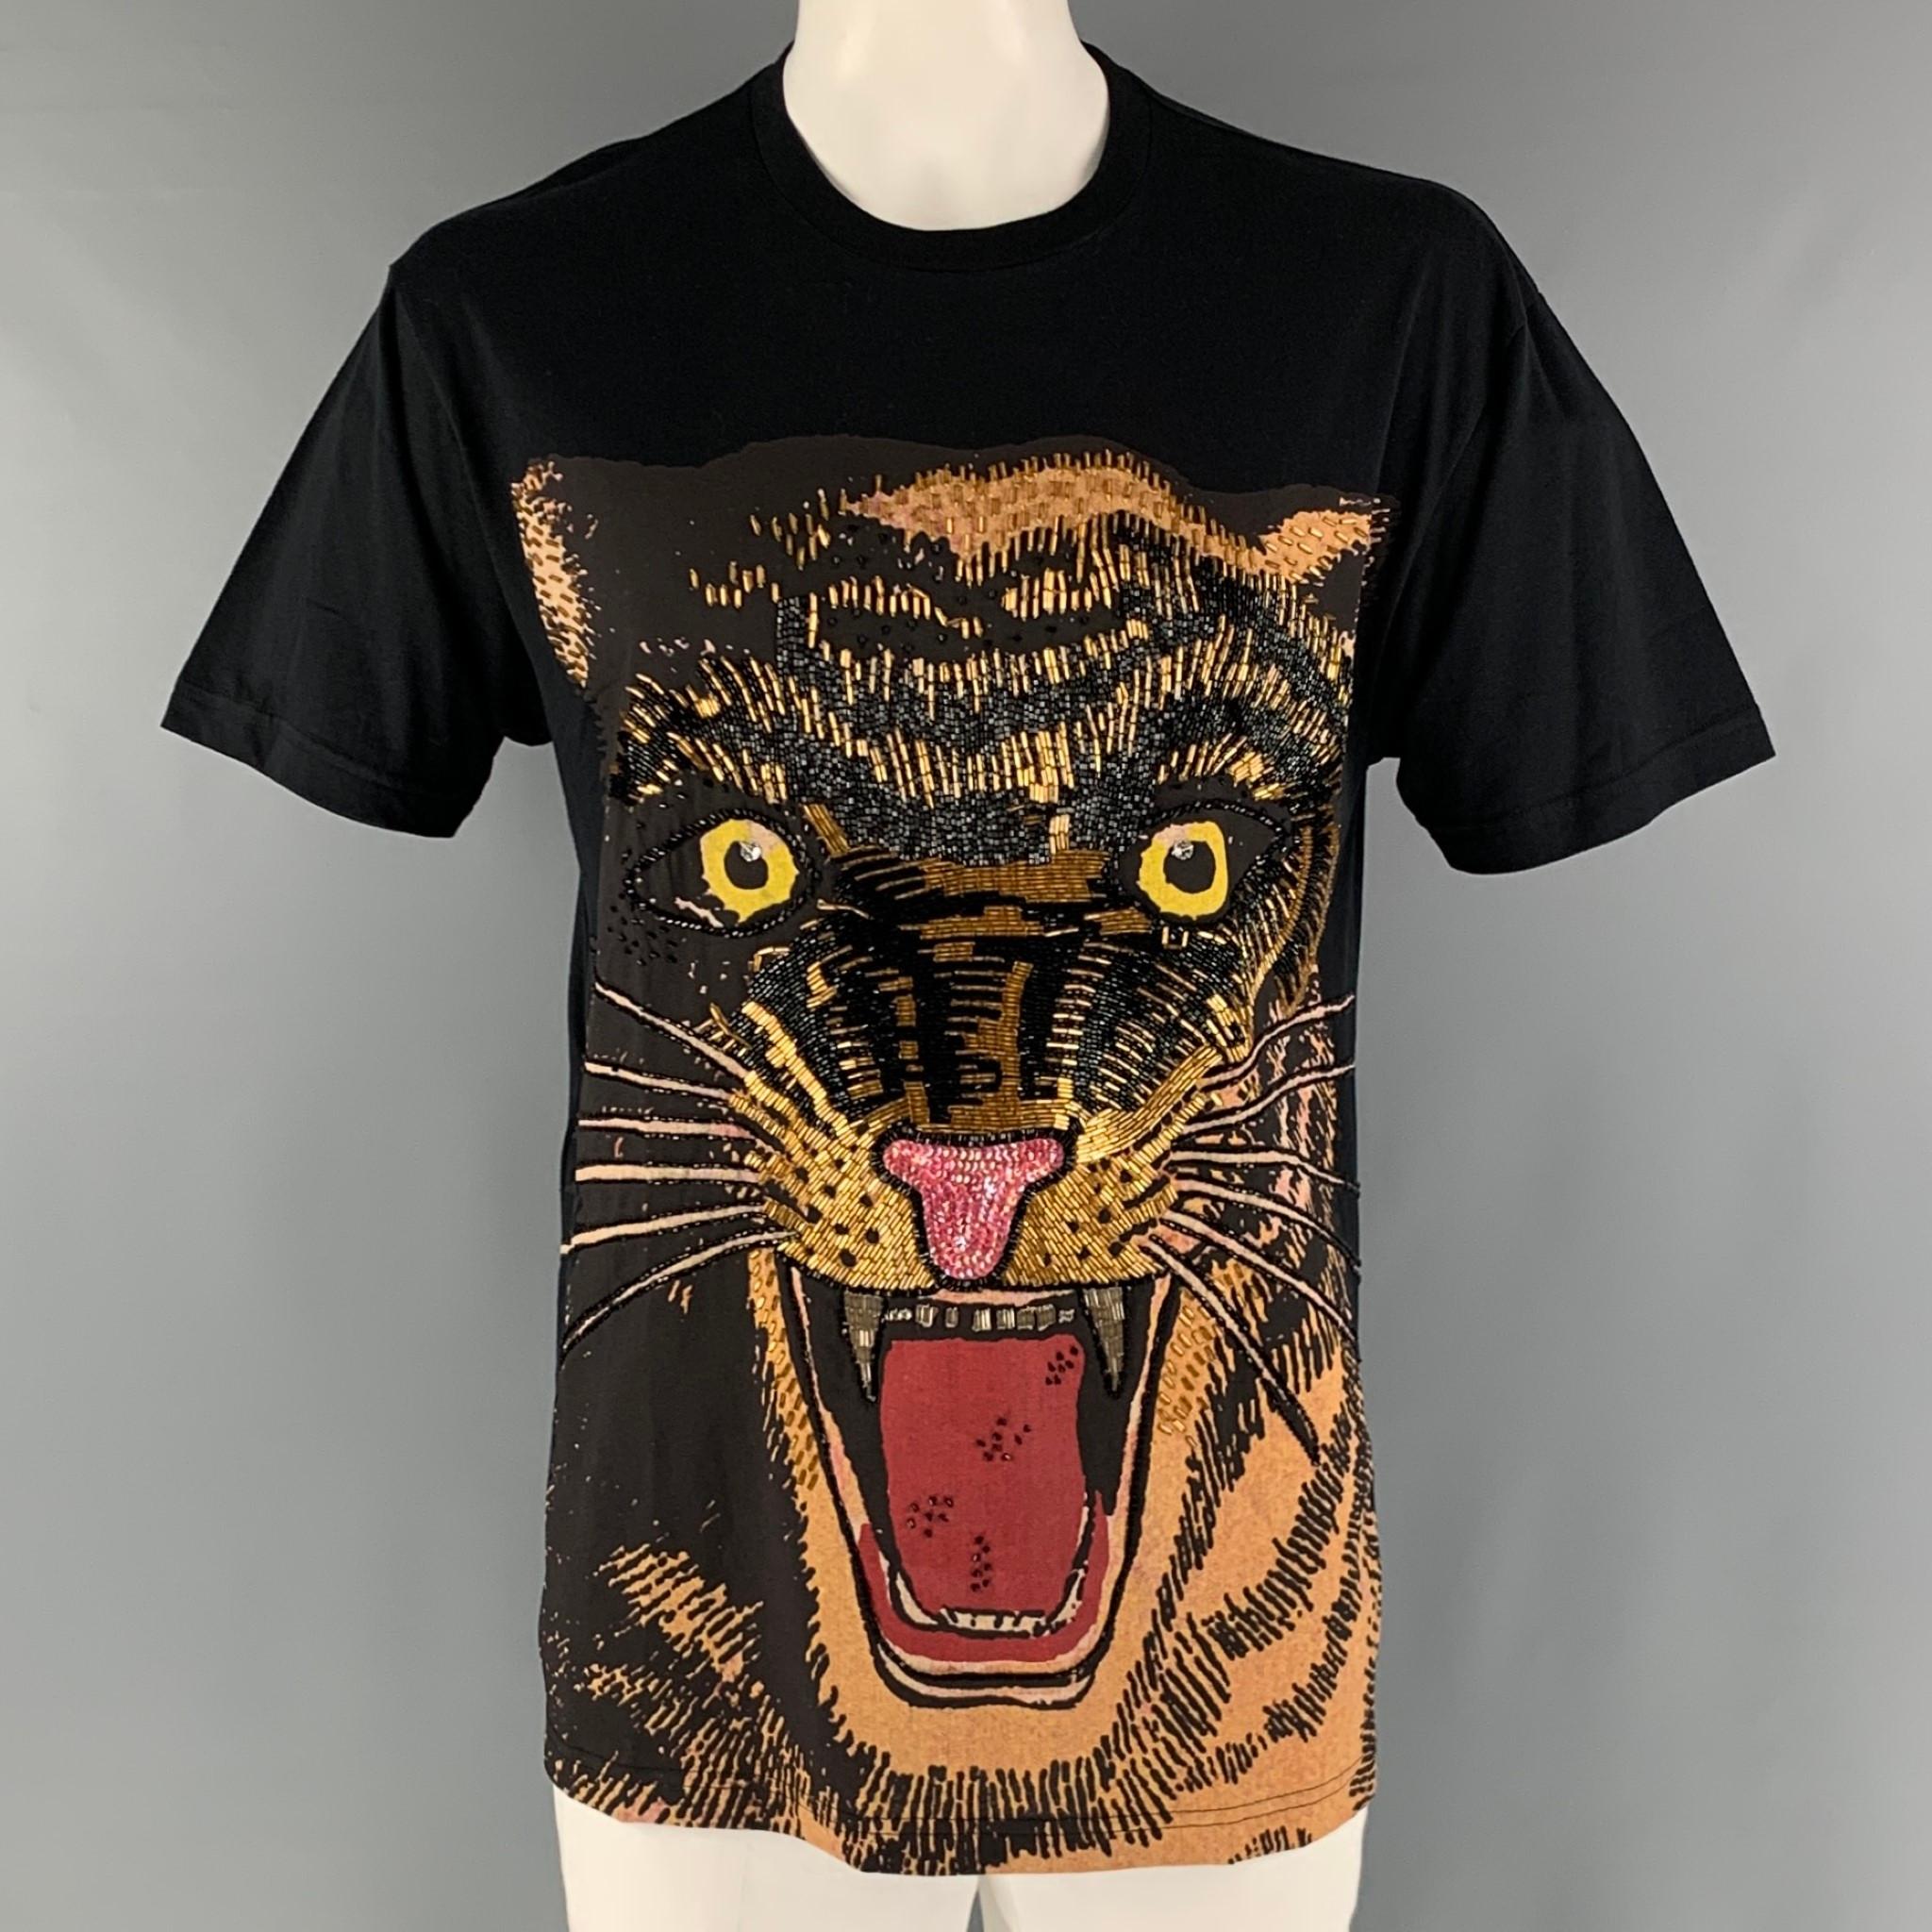 GUCCI F/W 2019 oversized t-shirt comes in a black jersey cotton knit material featuring a feline print with bead and sequin embroidery design at front and a crew-neck. Made in Italy.

New with Tags.
Marked: S

Measurements:

Shoulder: 22 in.
Chest: